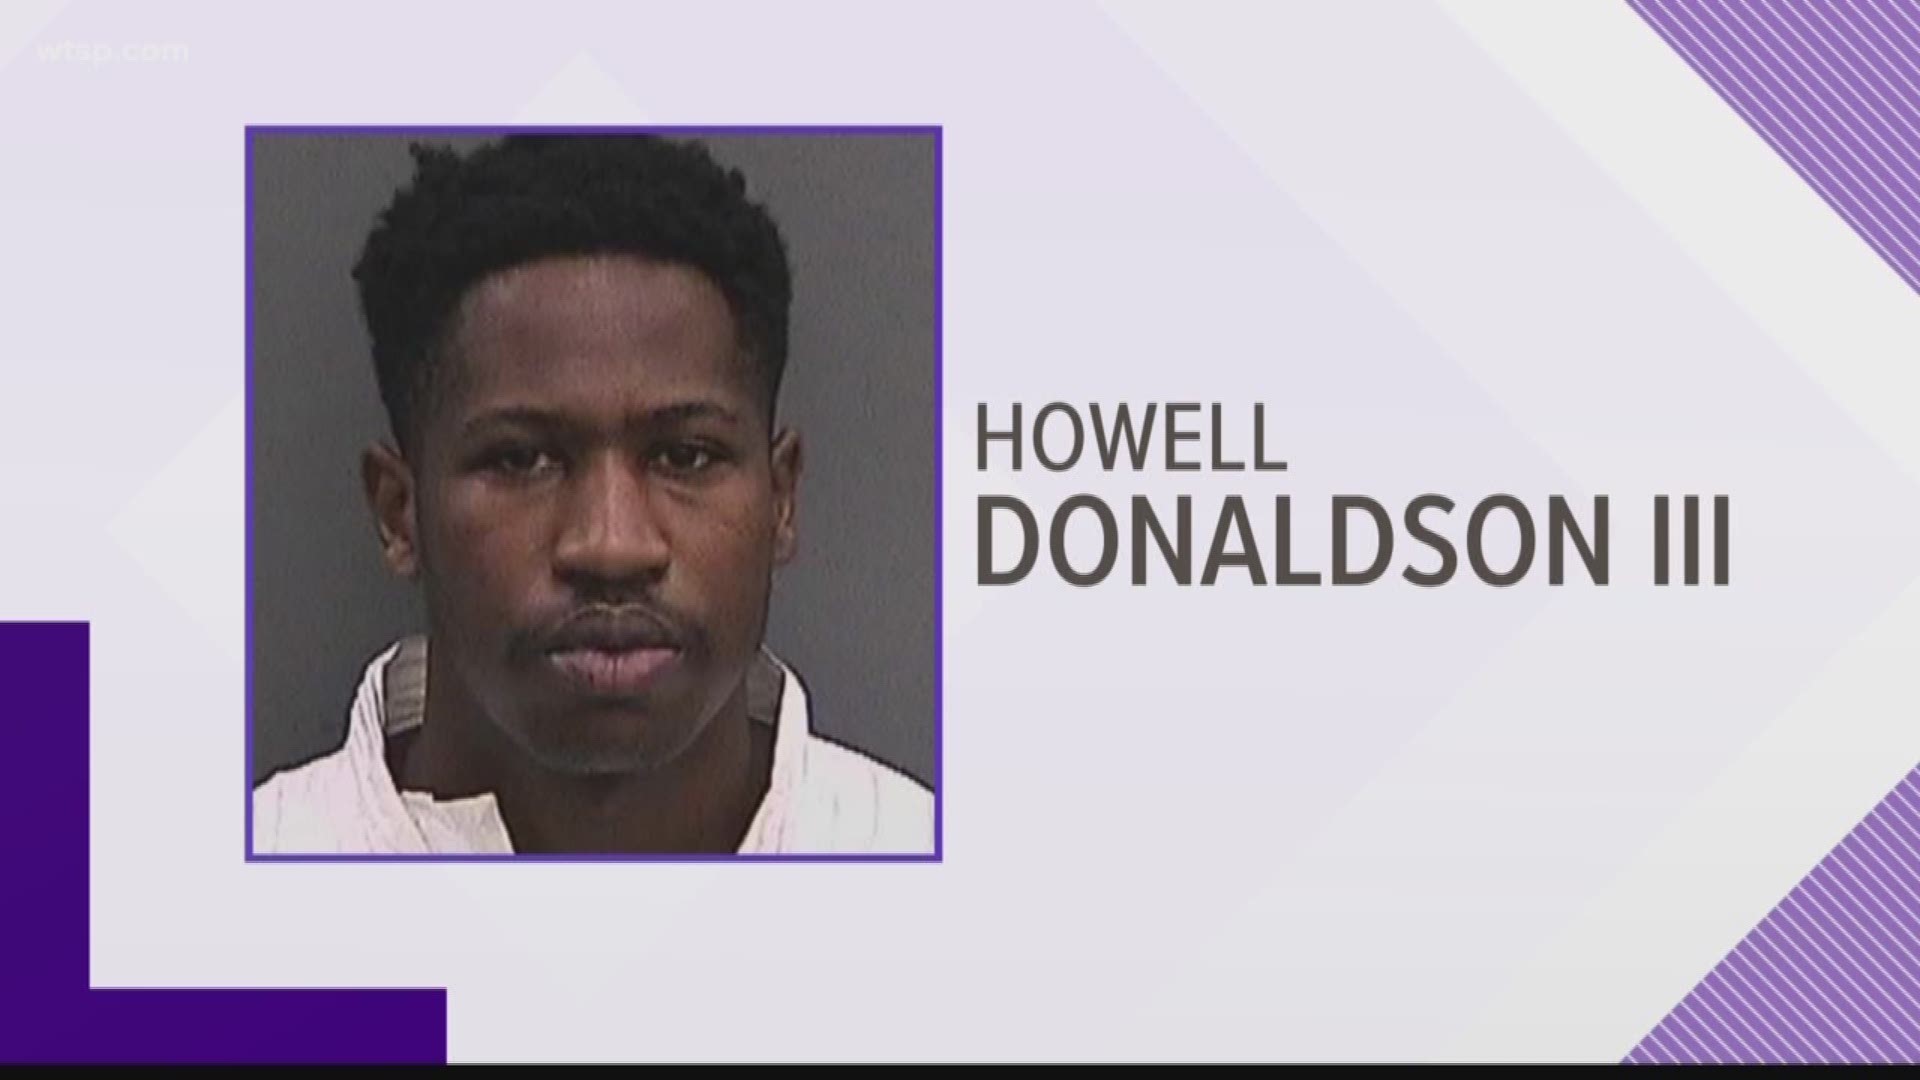 Tampa police have maintained they have only one suspect in the murders. Witness Robbie Clark said suspected shooter Howell Donaldson III was with two other people during a shooting on Nov. 14.